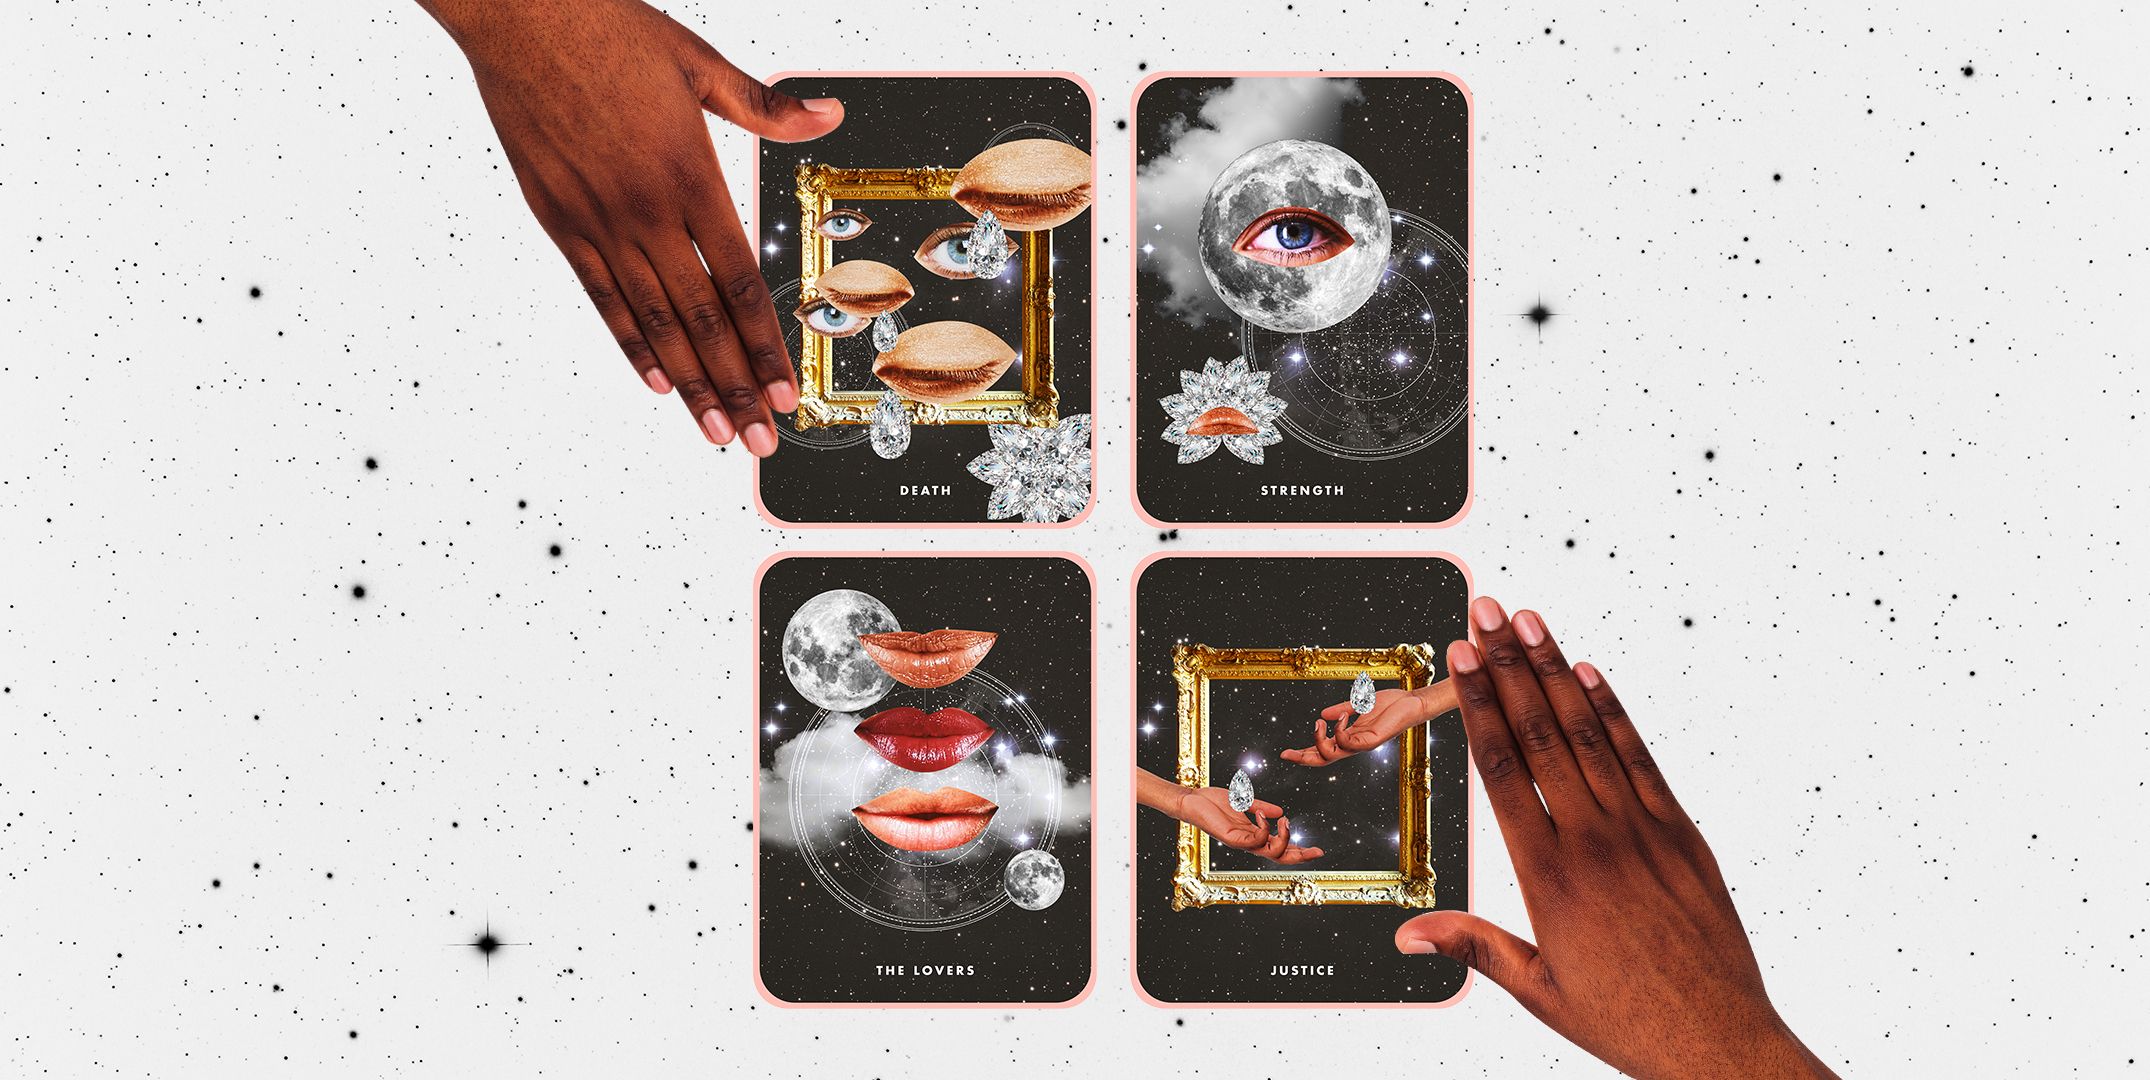 Tarot Cards By Zodiac Signs: Major Arcana Representing Astrology